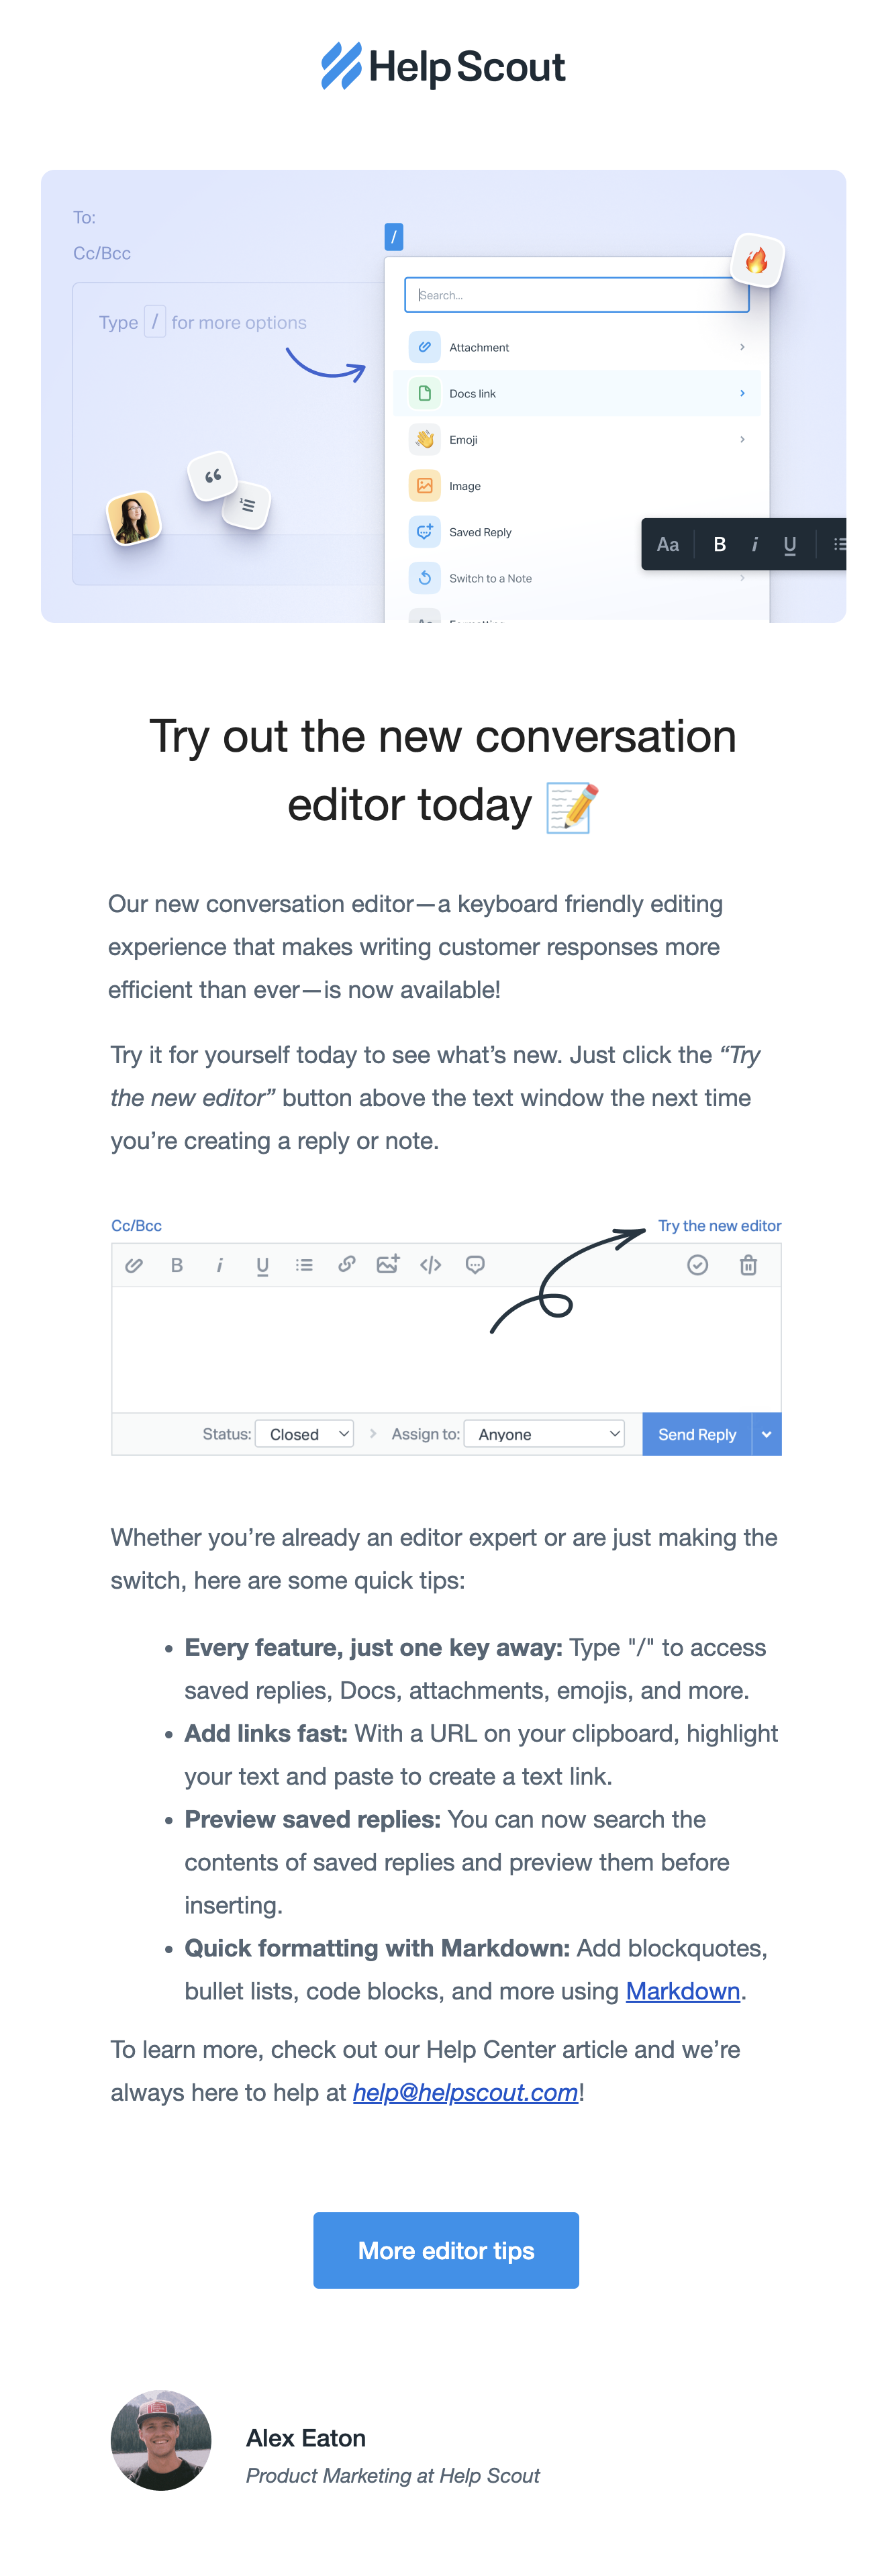 New Feature Announcement Emails: Screenshot of Asana's email talking about their latest feature